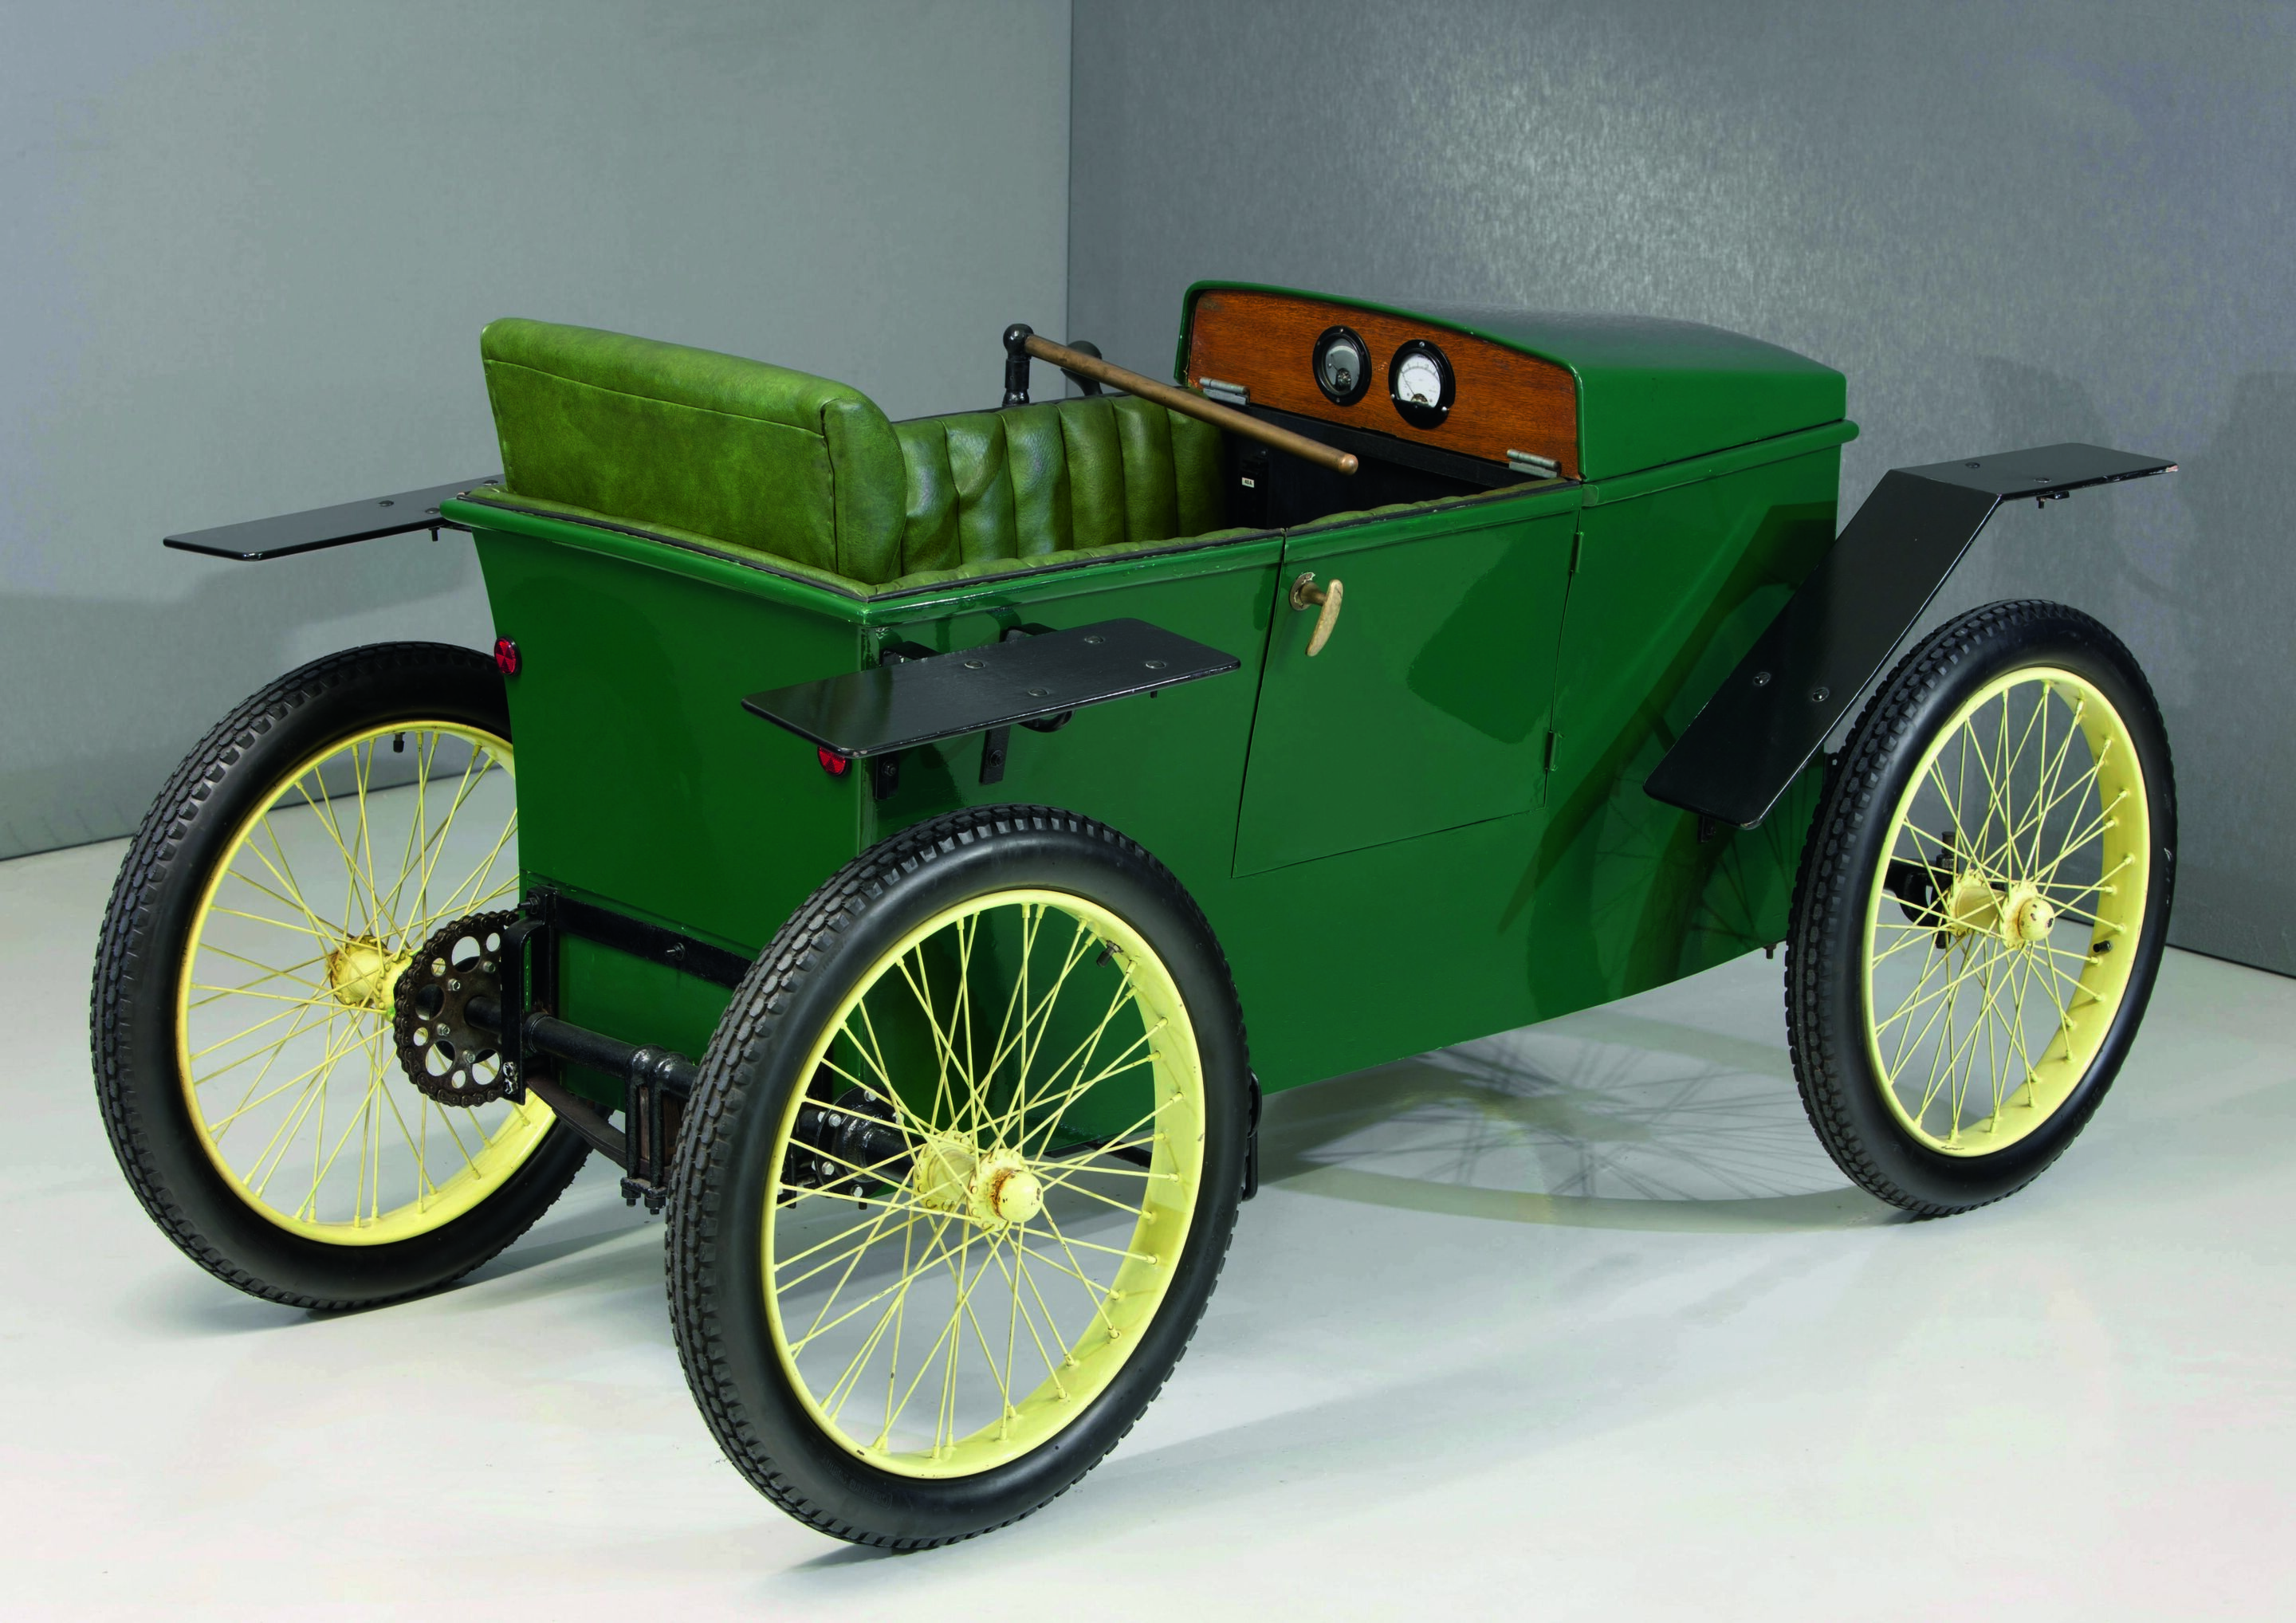 The Slaby-Beringer electric car